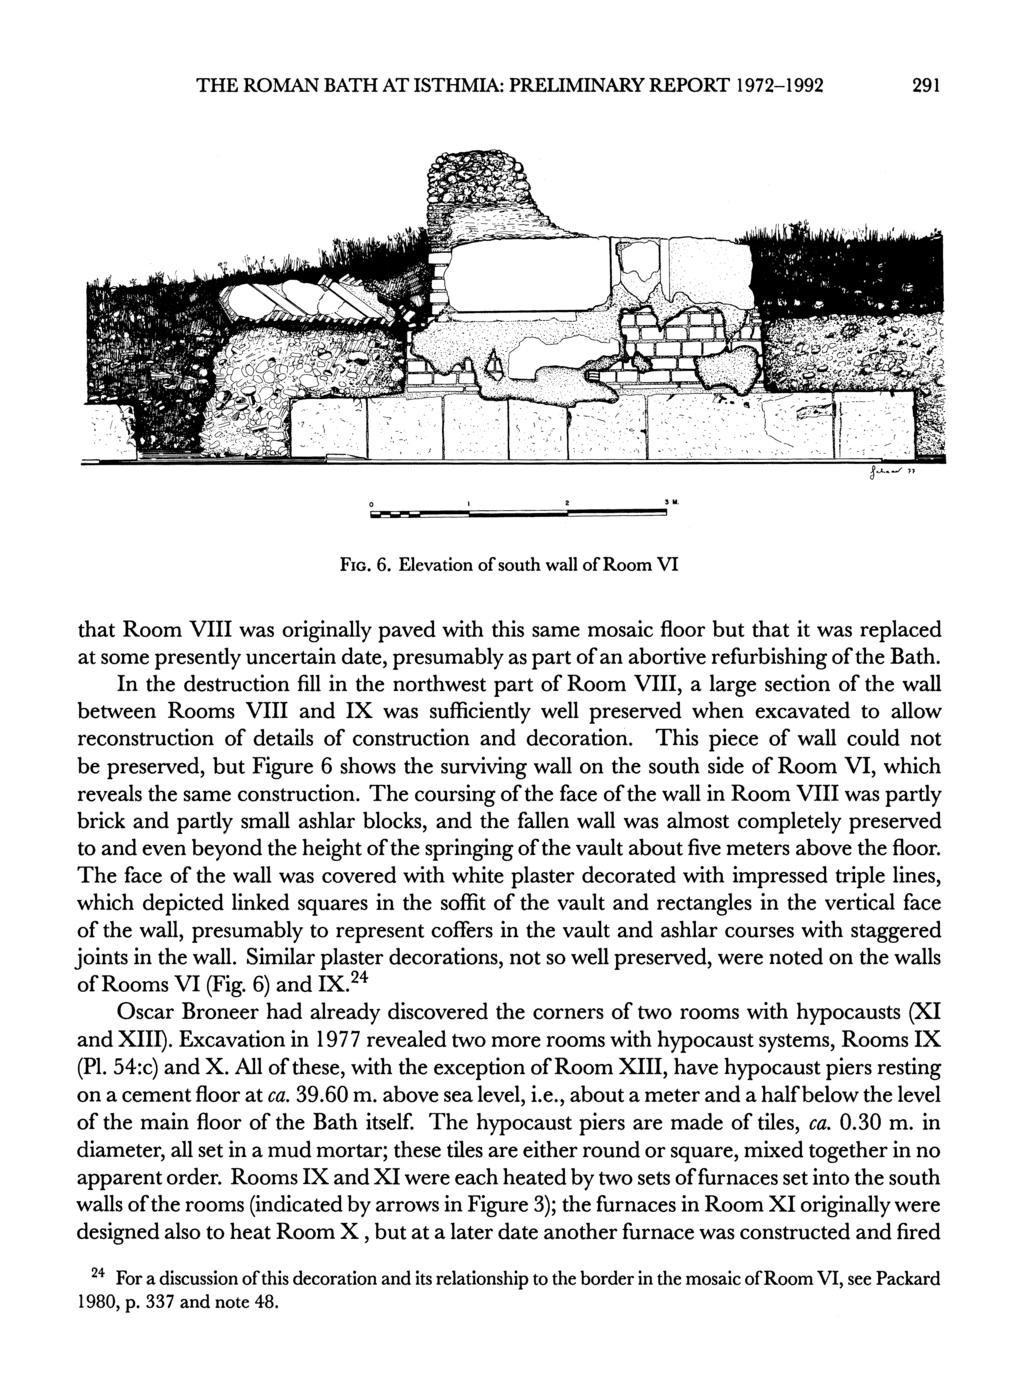 THE ROMAN BATH AT ISTHMIA: PRELIMINARY REPORT 1972-1992 291 0 2 SM. FIG. 6.